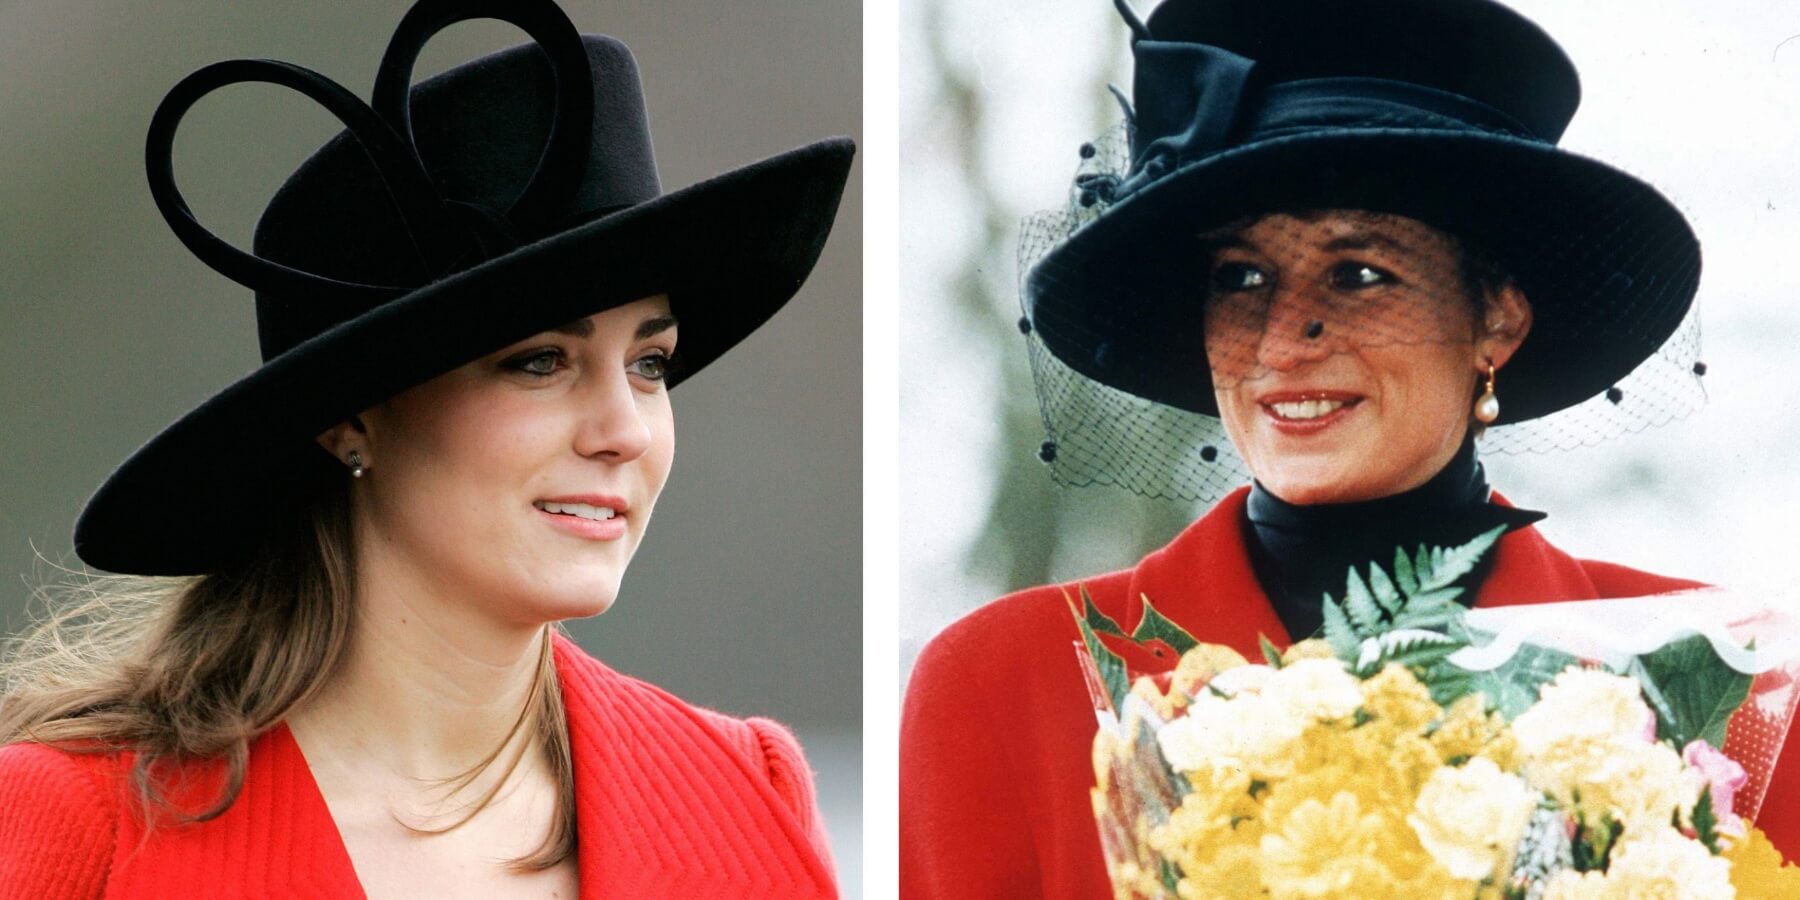 Kate Middleton and Princess Diana wearing similar outfits in side-by-side photographs